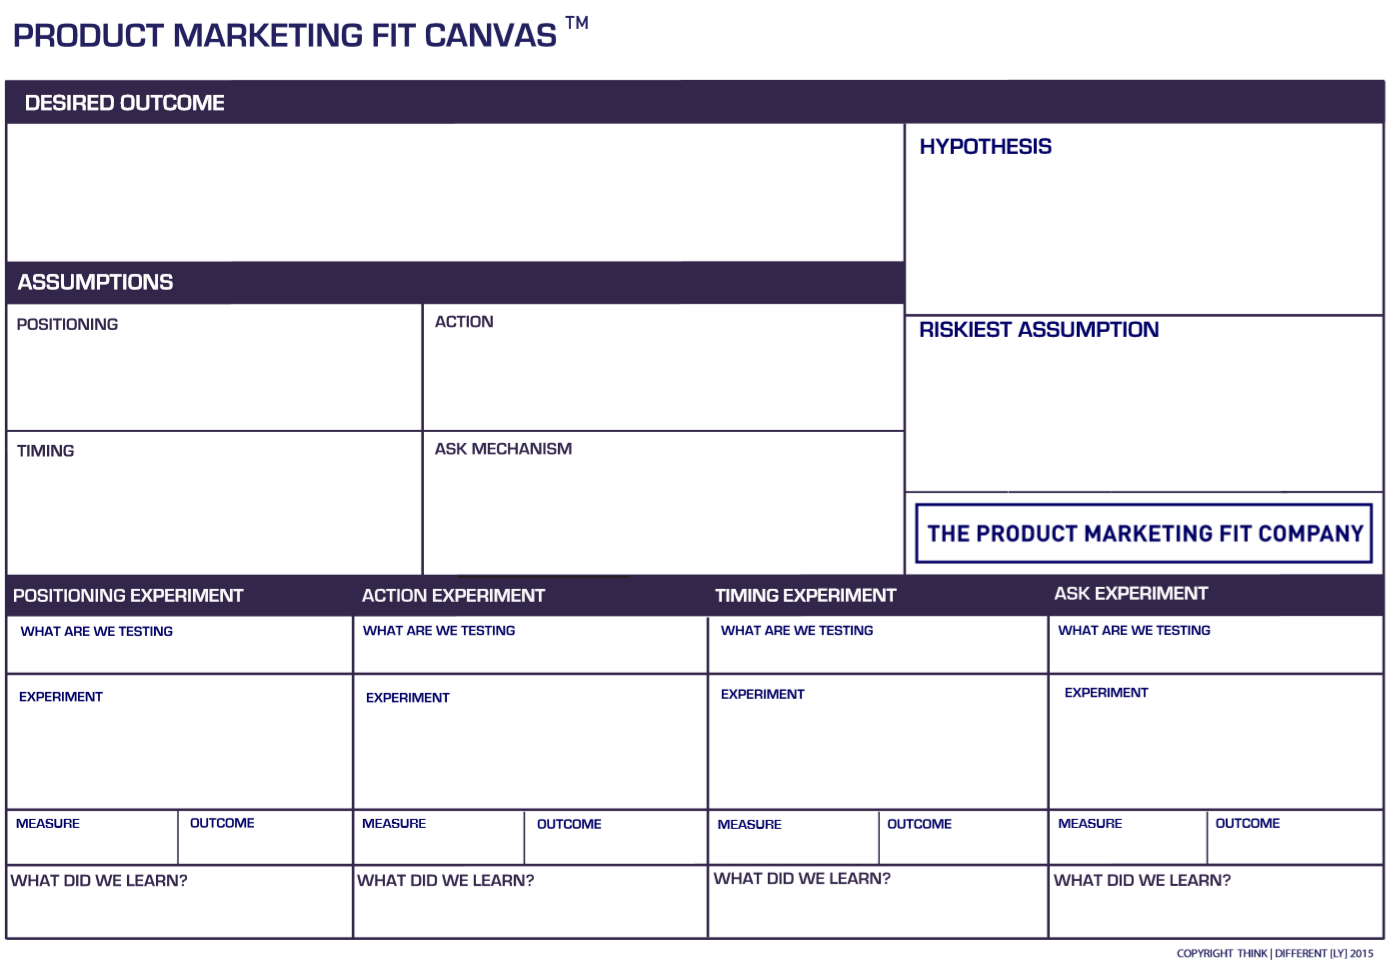 Product Marketing Fit Canvas